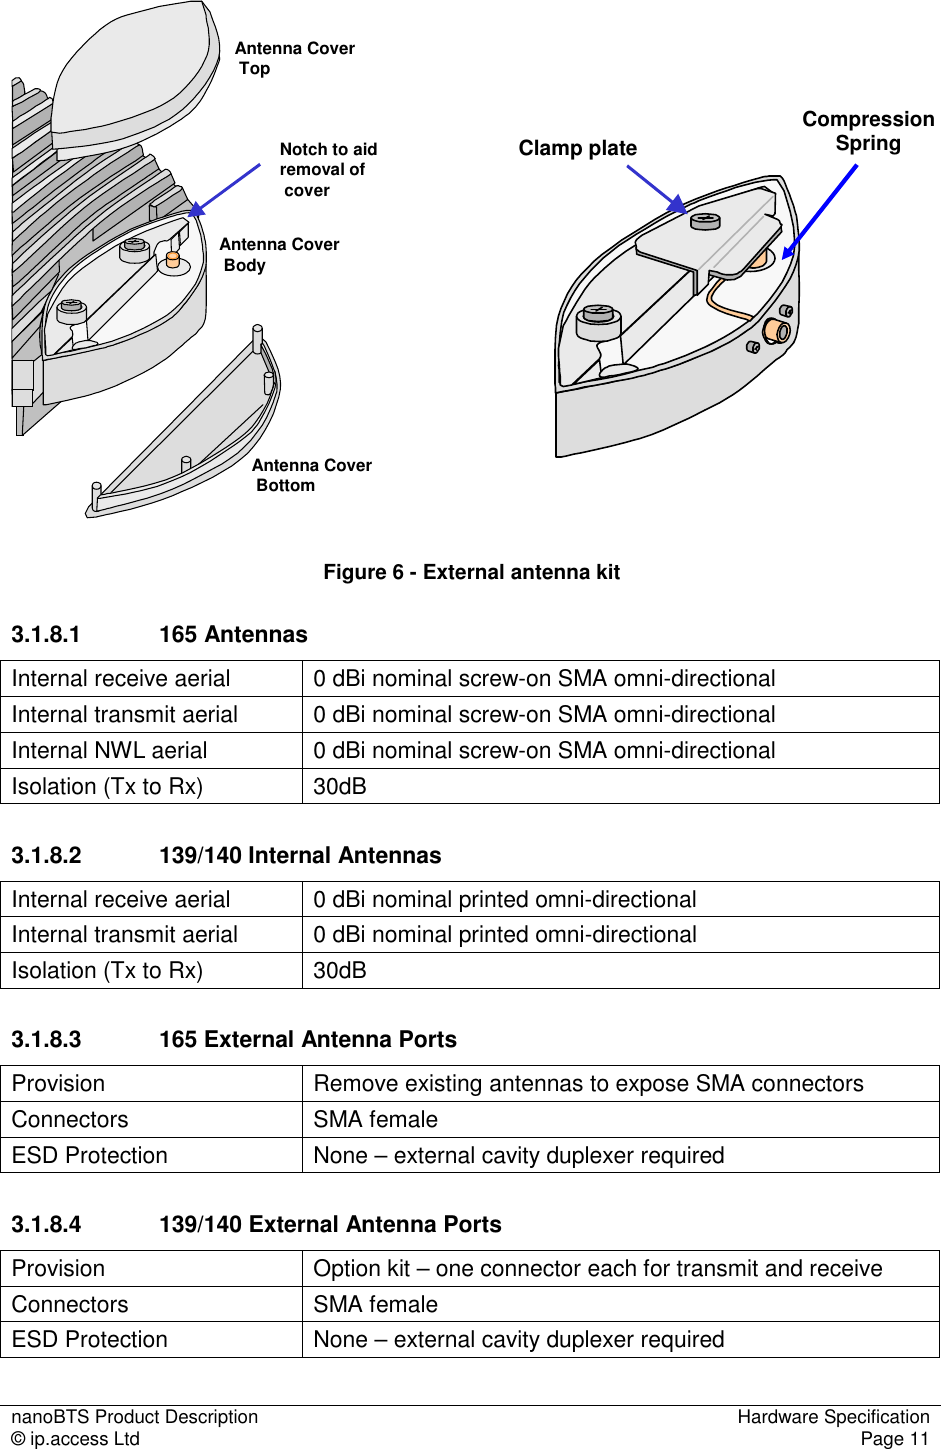 nanoBTS Product Description  Hardware Specification © ip.access Ltd  Page 11  Antenna CoverTopAntenna CoverBottomNotch to aid removal ofcoverAntenna CoverBody    Clamp plate Figure 6 - External antenna kit 3.1.8.1  165 Antennas Internal receive aerial  0 dBi nominal screw-on SMA omni-directional Internal transmit aerial  0 dBi nominal screw-on SMA omni-directional Internal NWL aerial  0 dBi nominal screw-on SMA omni-directional Isolation (Tx to Rx)  30dB 3.1.8.2  139/140 Internal Antennas Internal receive aerial  0 dBi nominal printed omni-directional Internal transmit aerial  0 dBi nominal printed omni-directional Isolation (Tx to Rx)  30dB 3.1.8.3  165 External Antenna Ports Provision  Remove existing antennas to expose SMA connectors Connectors   SMA female ESD Protection  None – external cavity duplexer required 3.1.8.4  139/140 External Antenna Ports Provision  Option kit – one connector each for transmit and receive Connectors   SMA female ESD Protection  None – external cavity duplexer required Compression Spring 